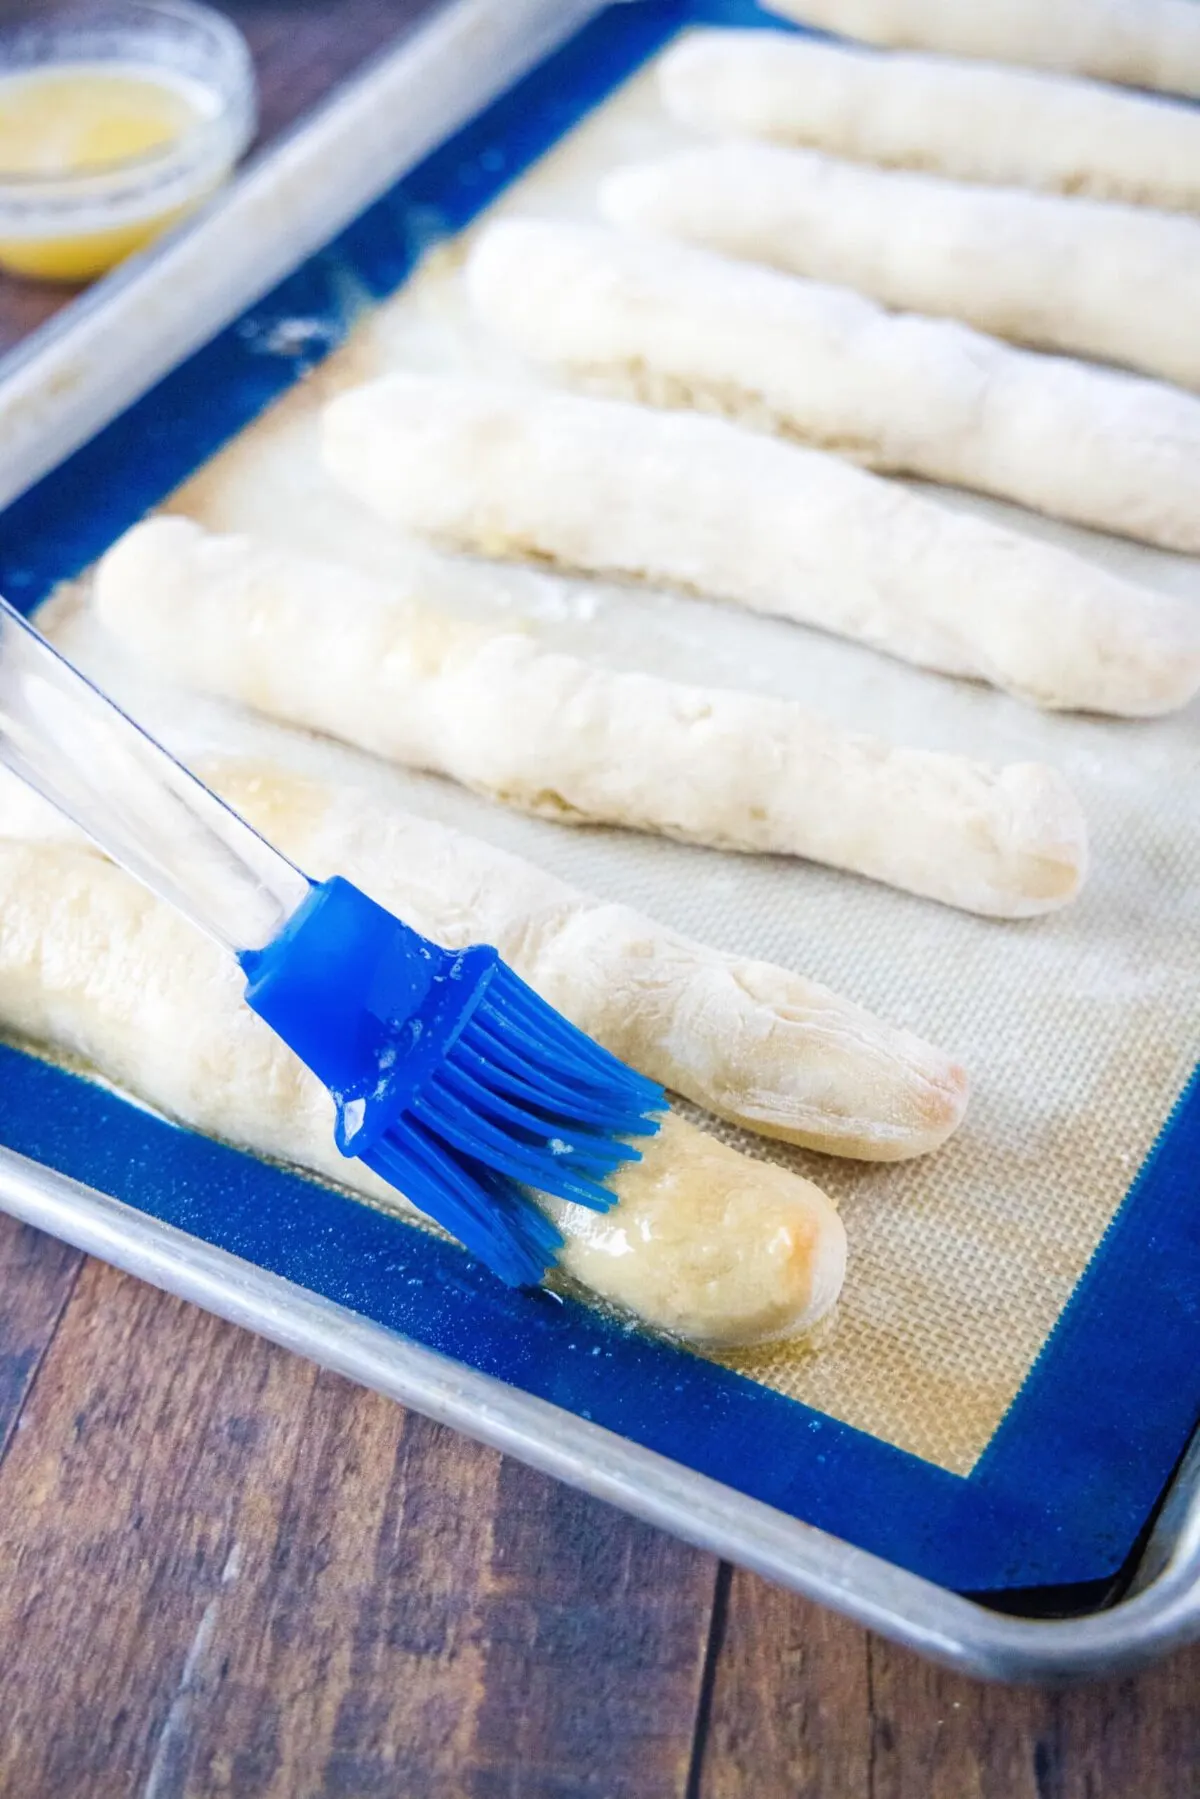 A brush painting butter onto breadsticks on a baking sheet